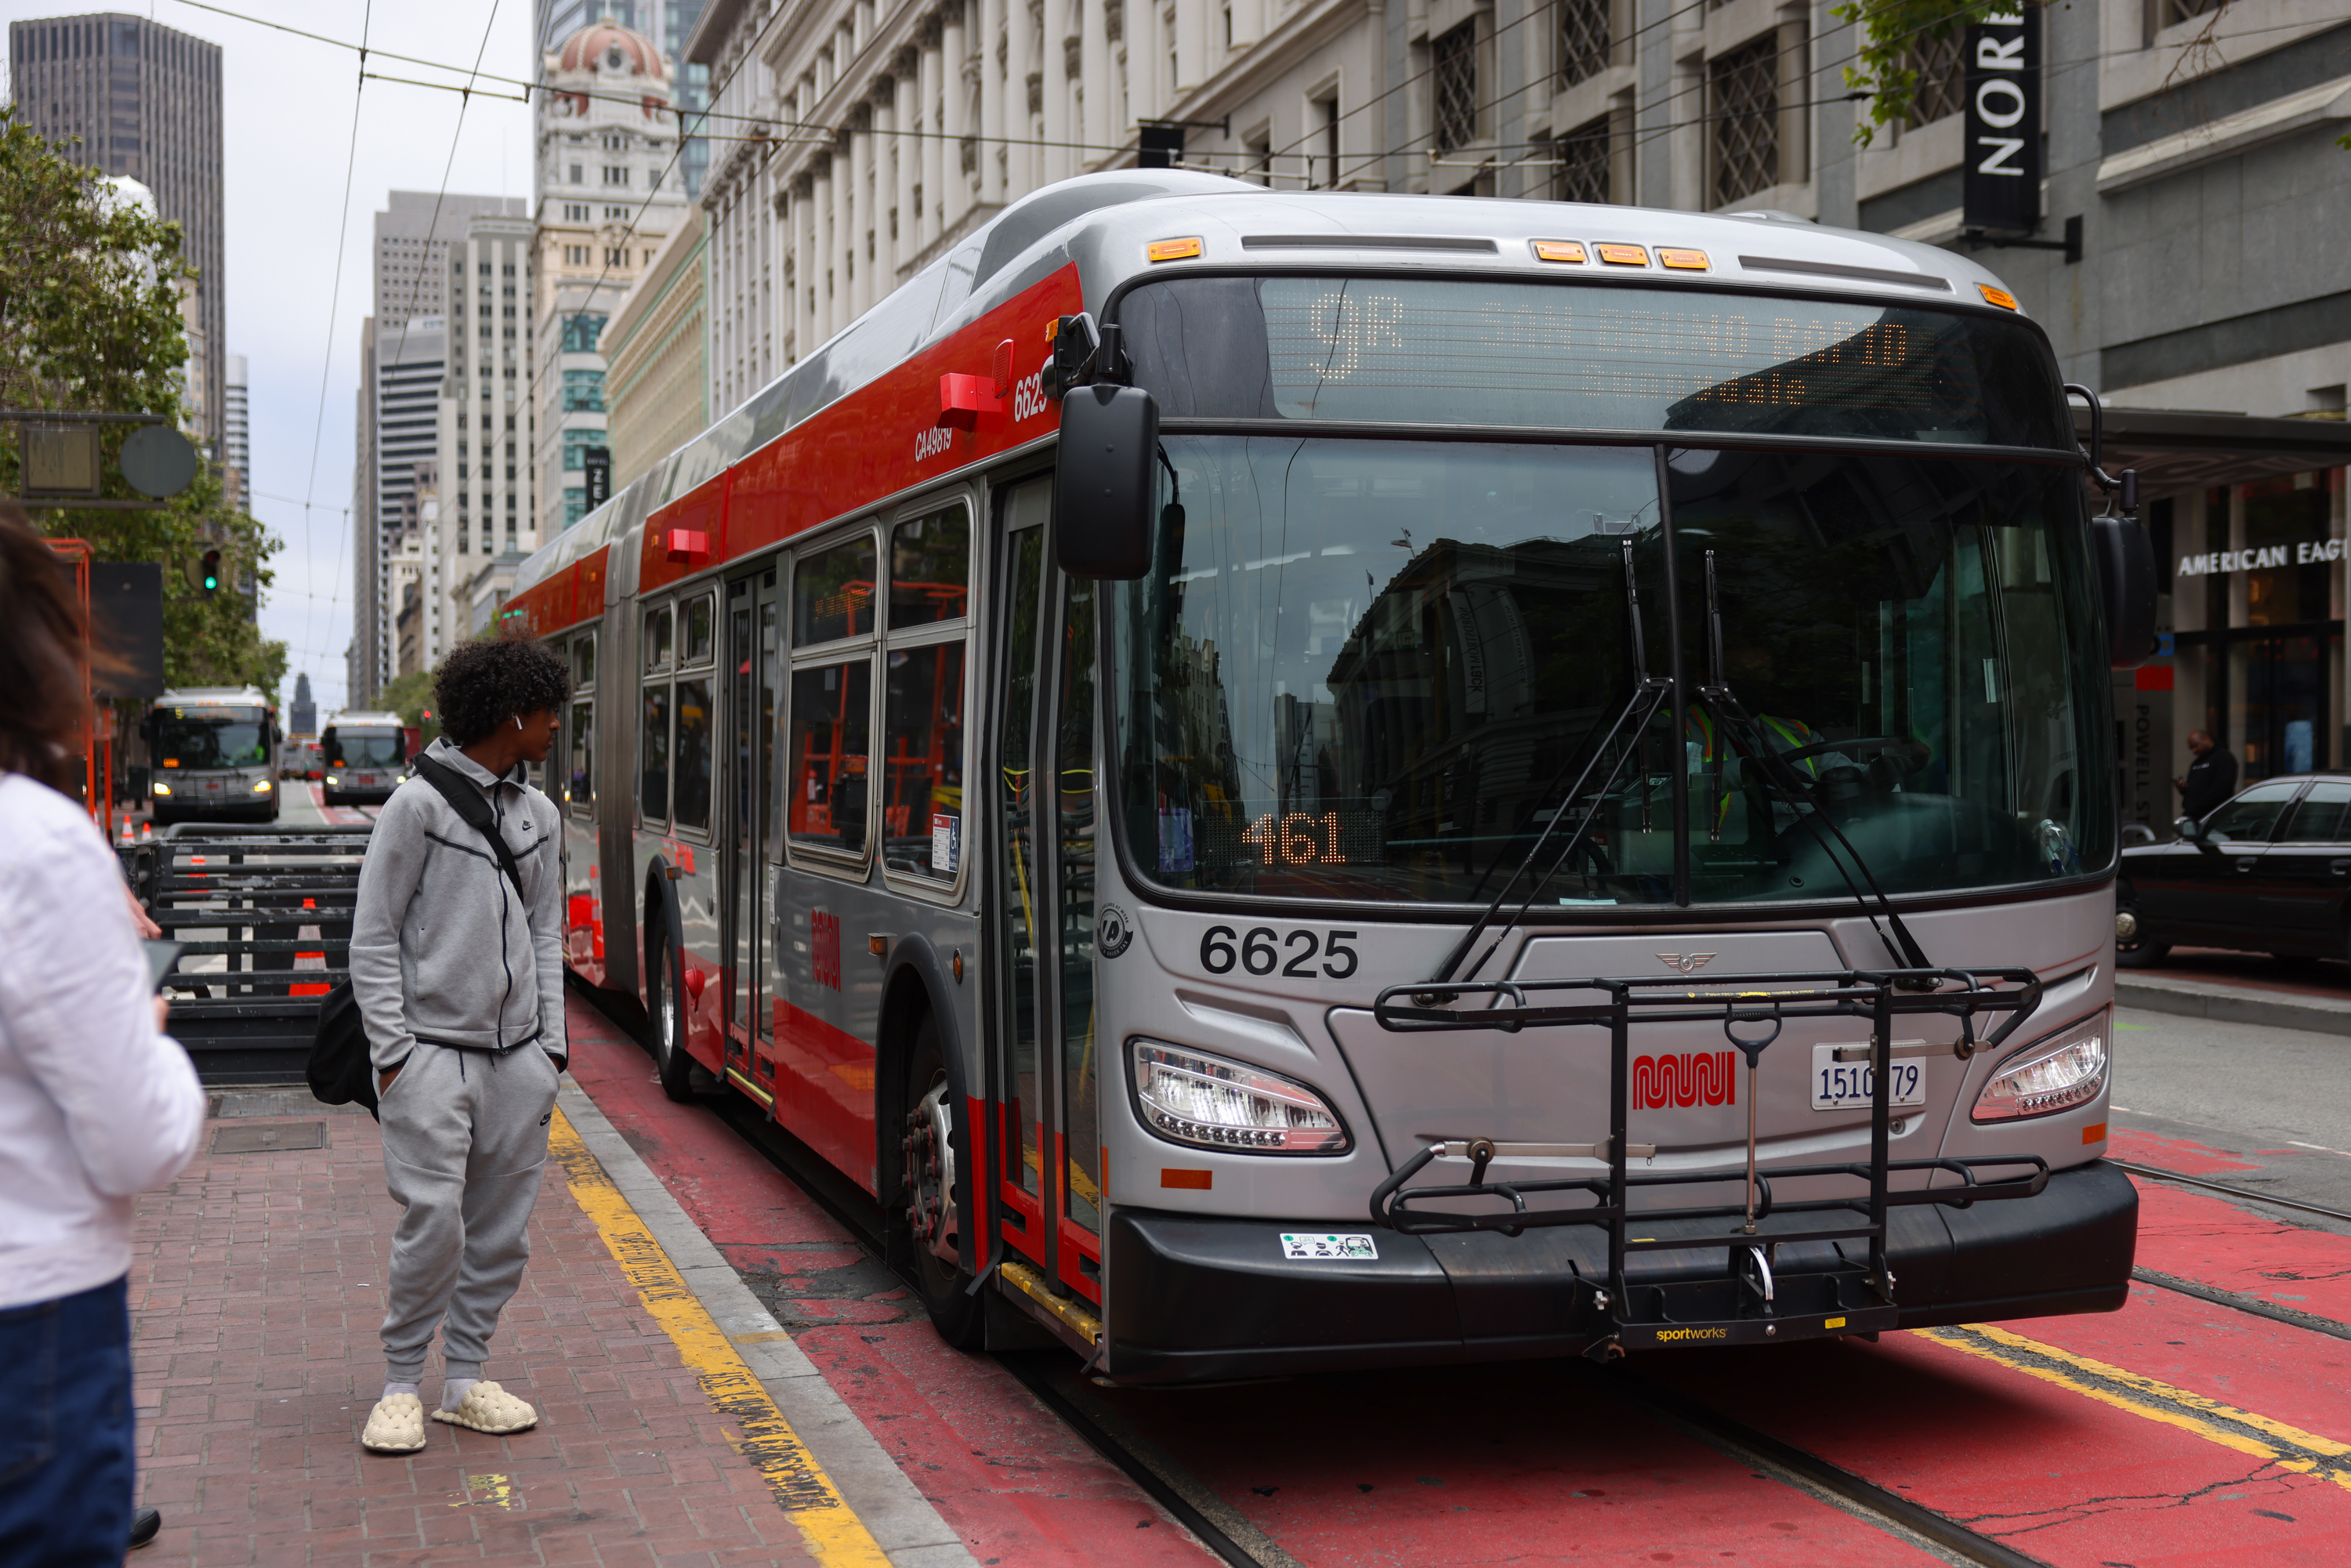 A red city bus with a digital sign is parked on a street, with pedestrians nearby.